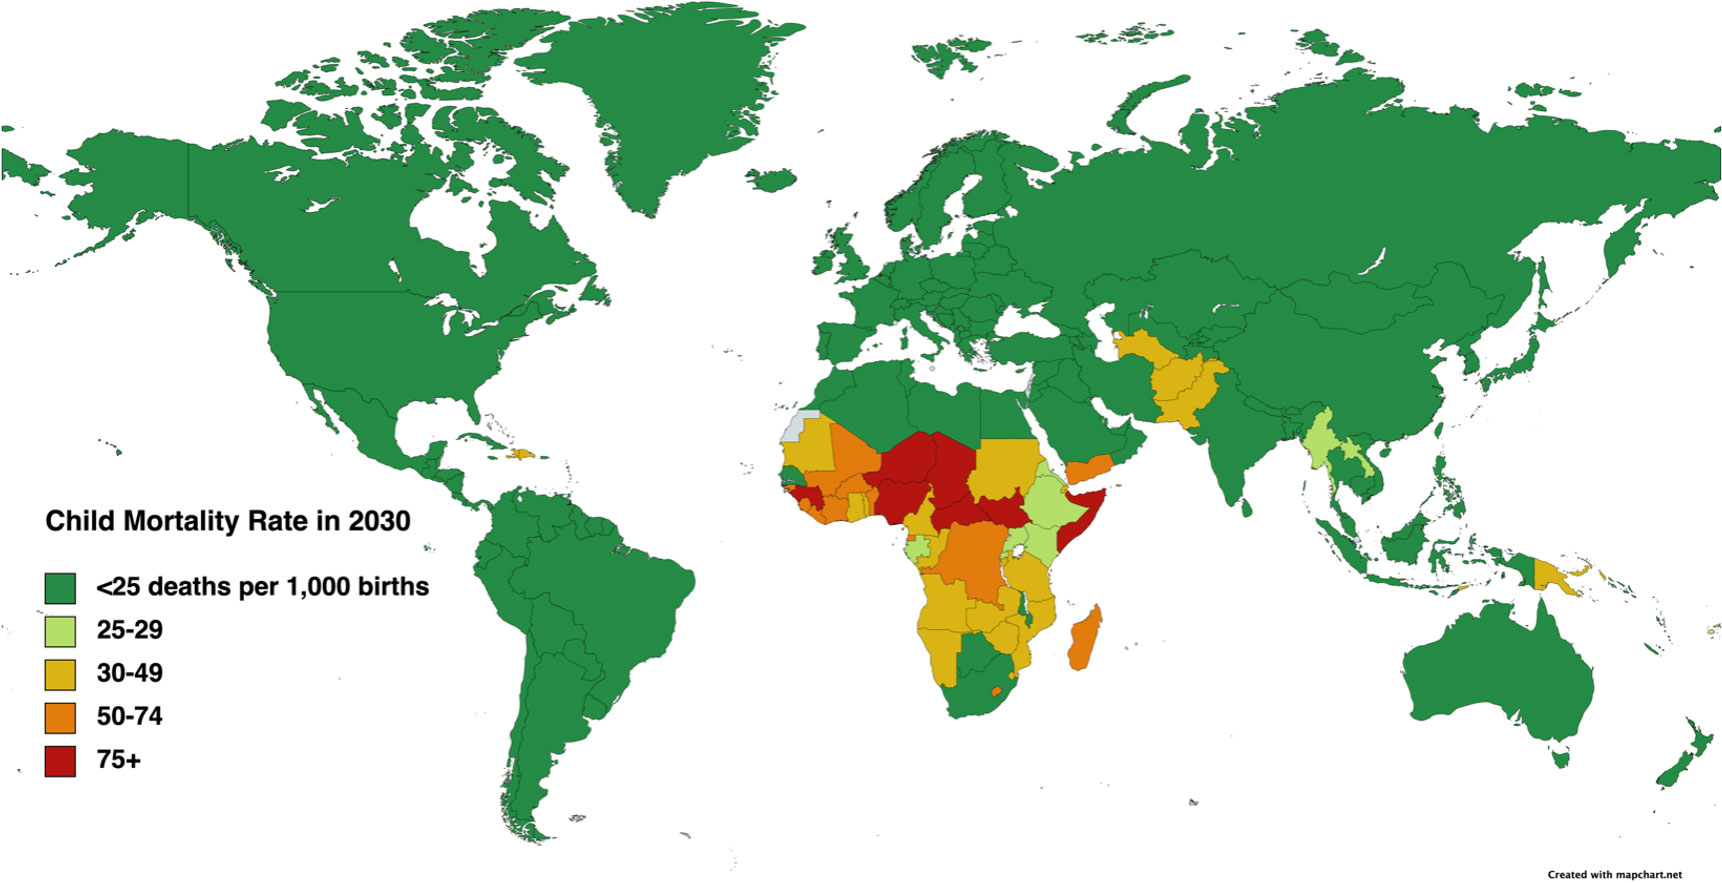 World map showing Child Mortality Rate in 2030